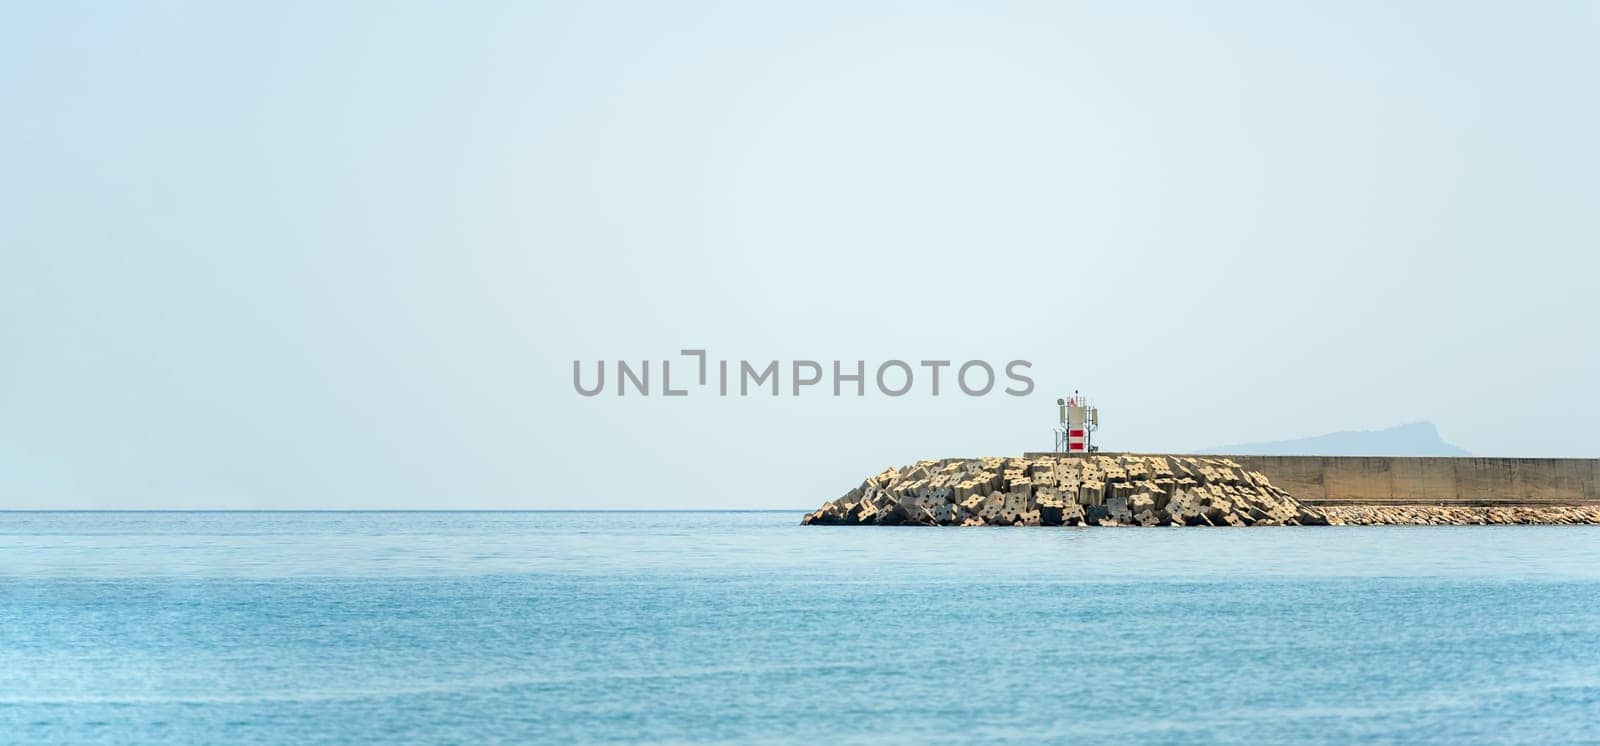 Breakwater and lighthouse at the entrance of the fishing harbor in Antalya Turkey by Sonat